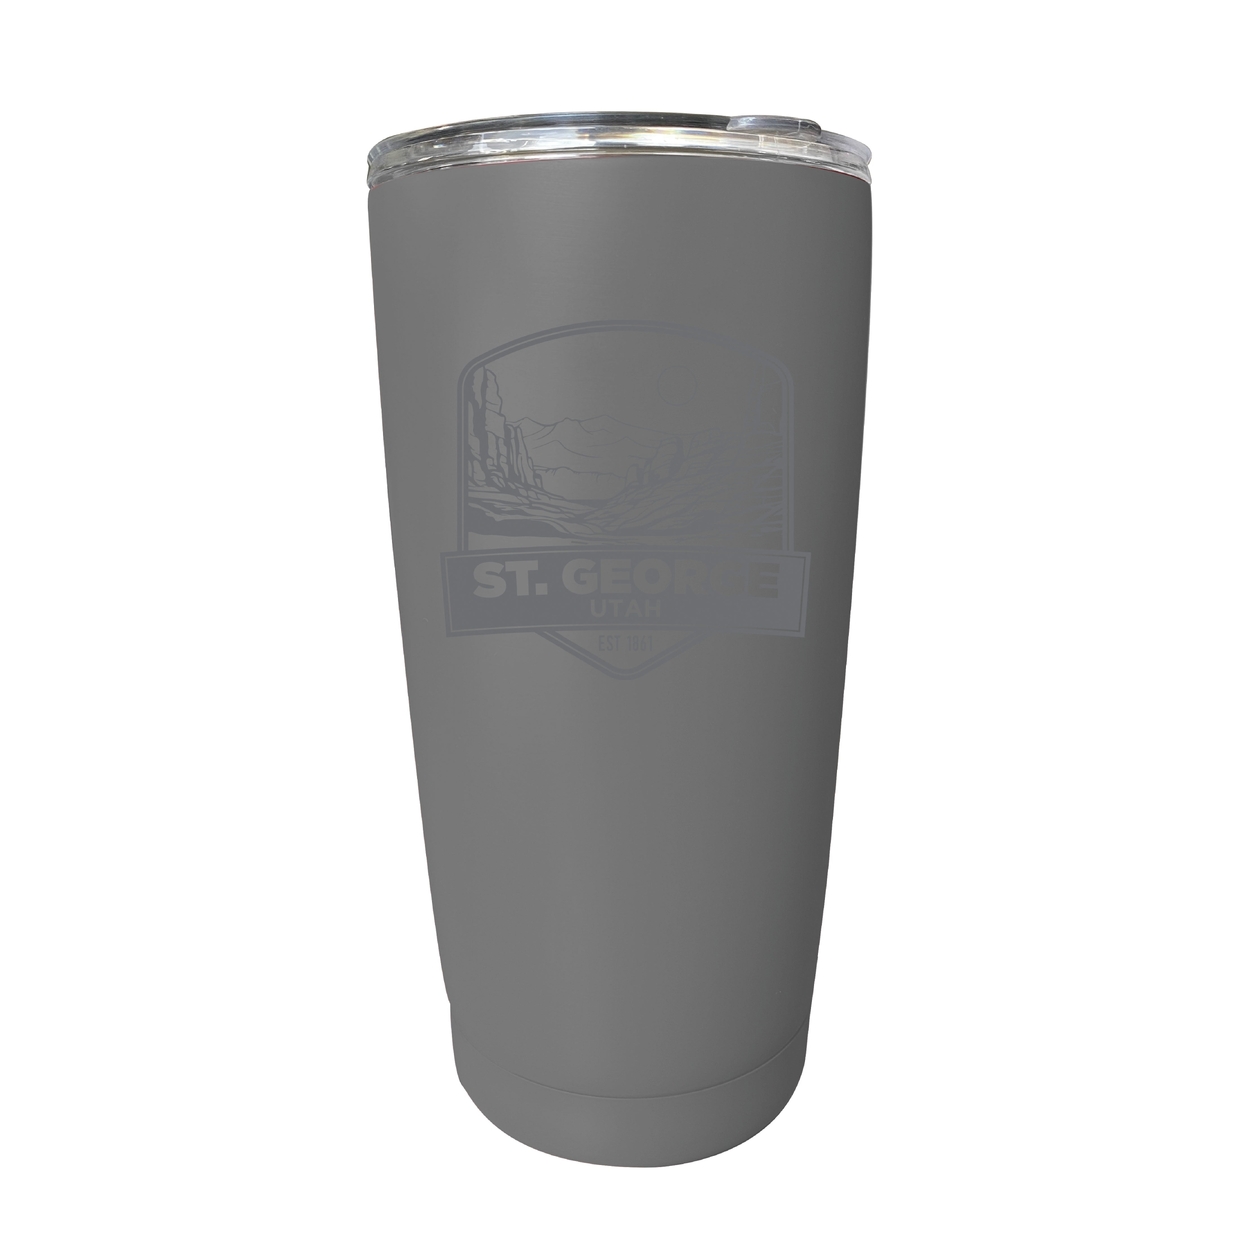 St. George Utah Souvenir 16 Oz Engraved Stainless Steel Insulated Tumbler - Gray,,Single Unit